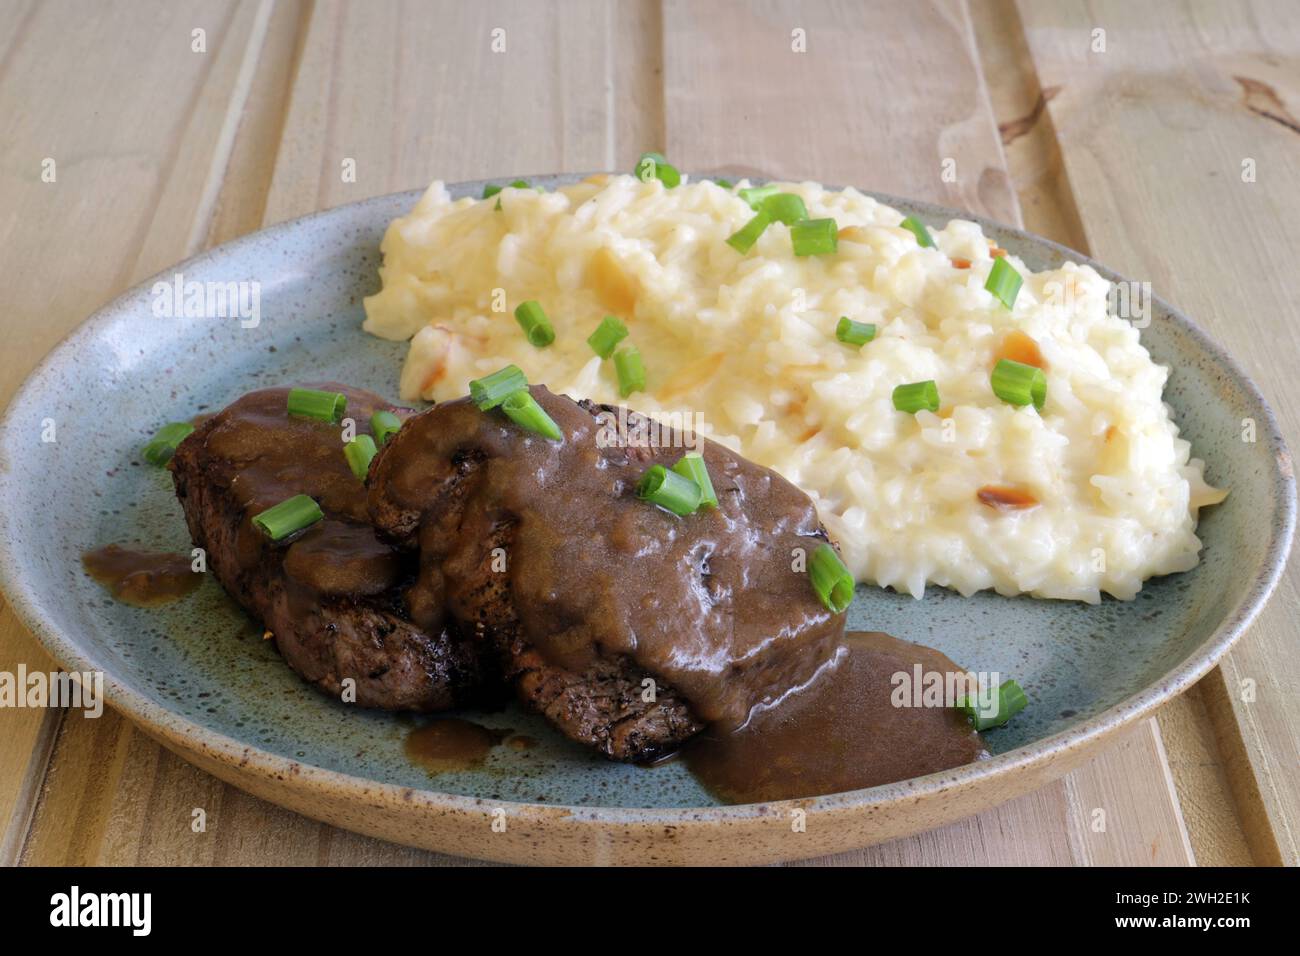 A beef fillet mignon, covered with coffee sauce, accompanied by creamy rice with almond slices. Stock Photo